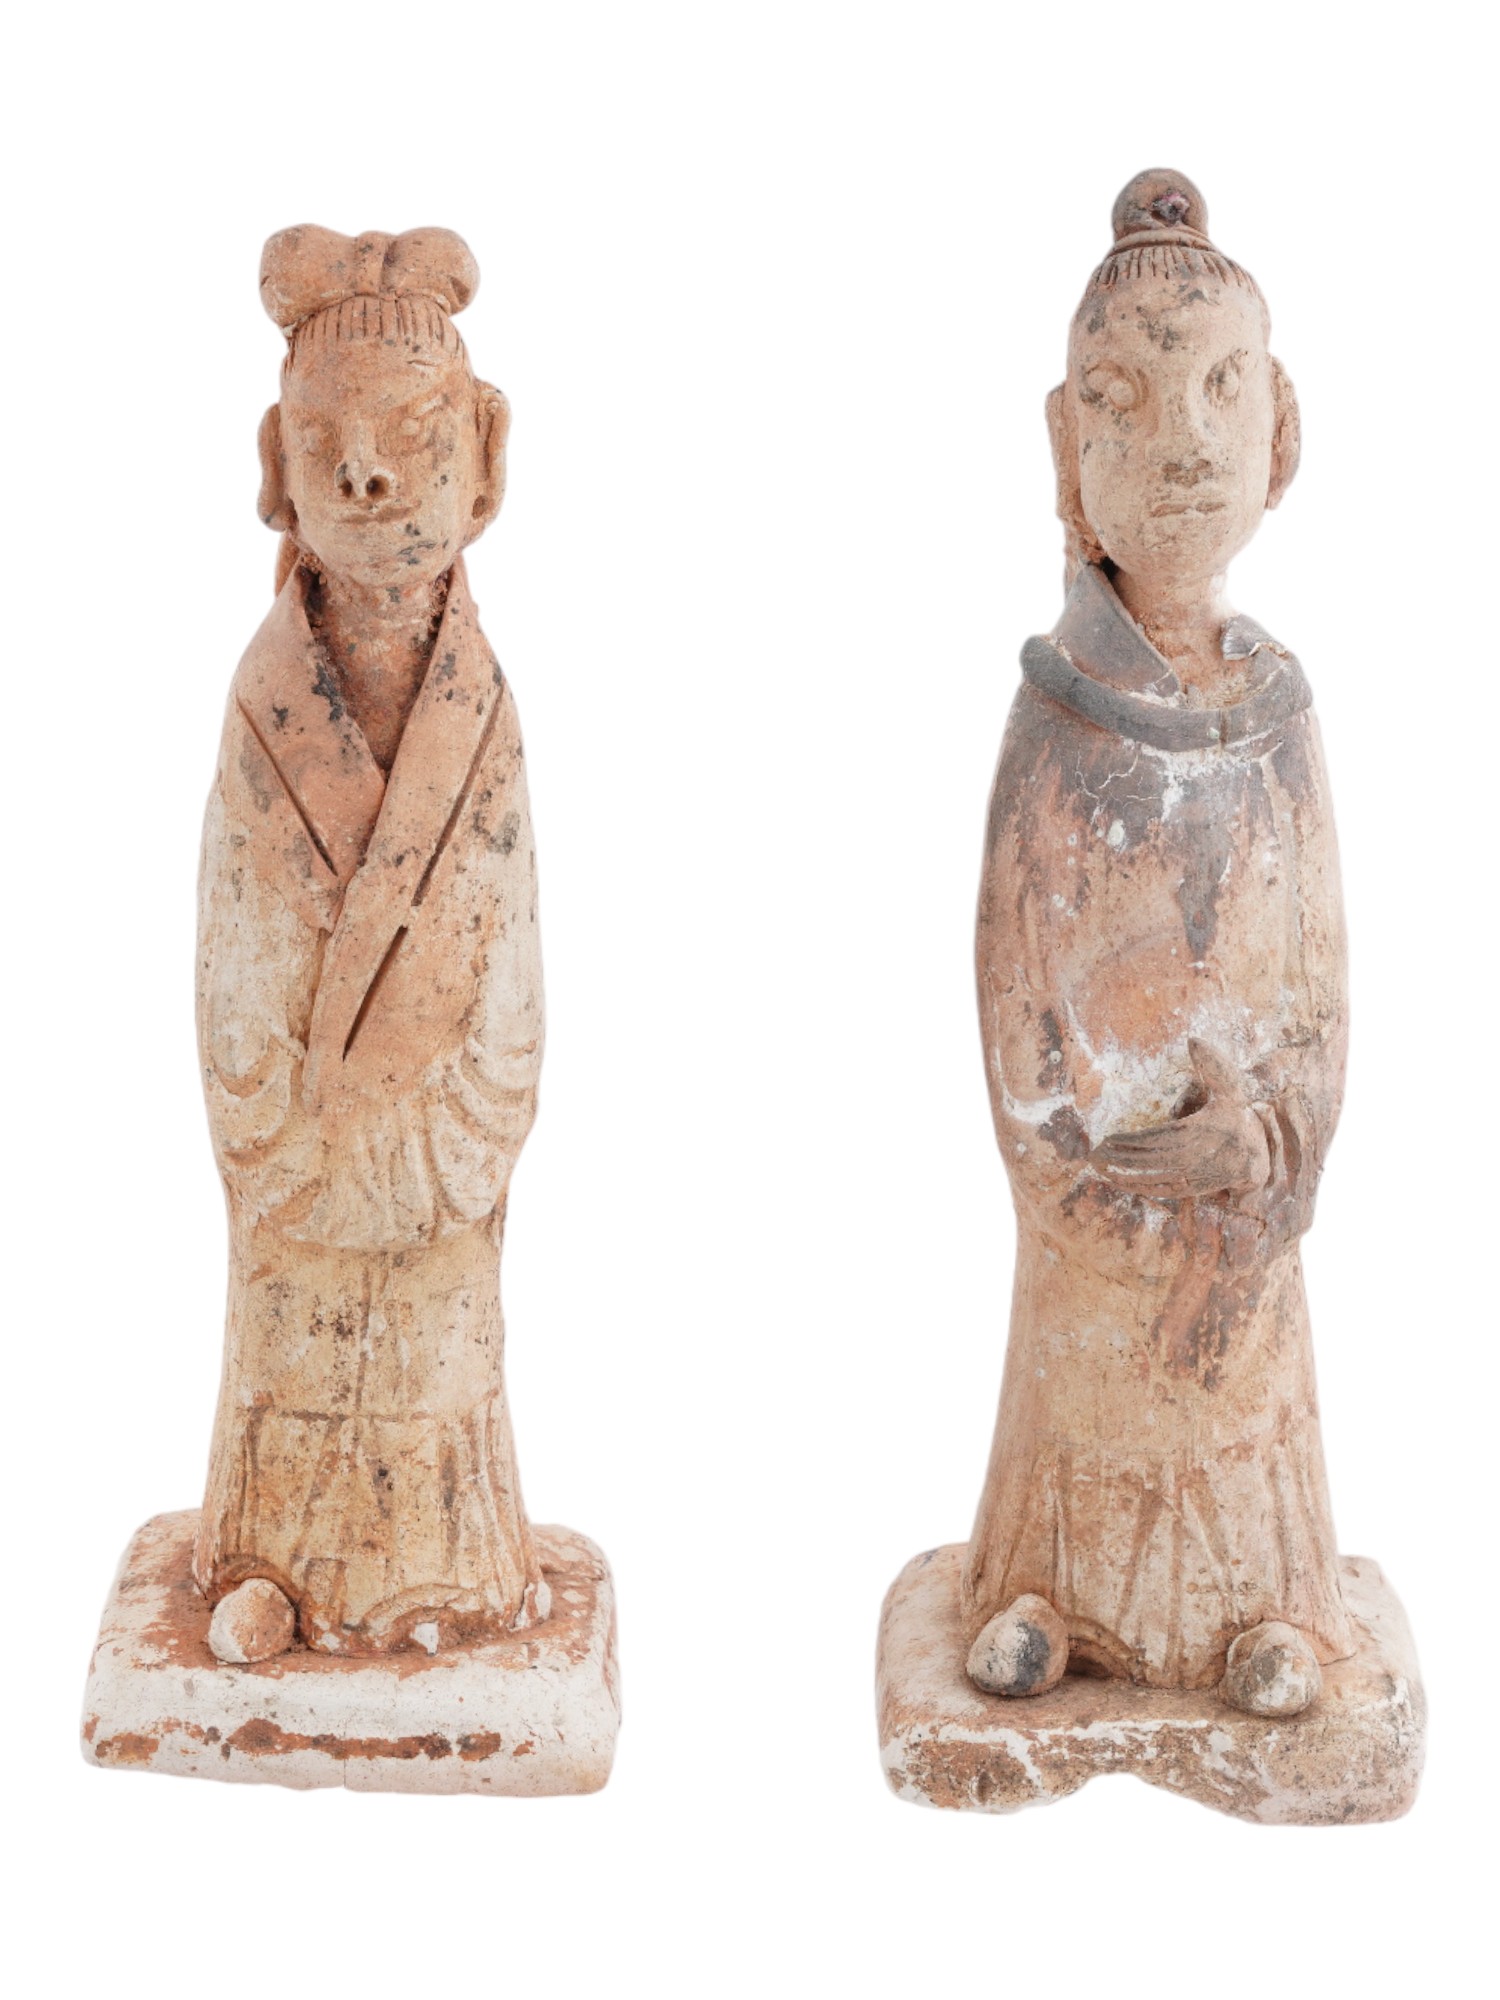 ANTIQUE CHINESE SONG DYNASTY TERRACOTTA FIGURINES PIC-1